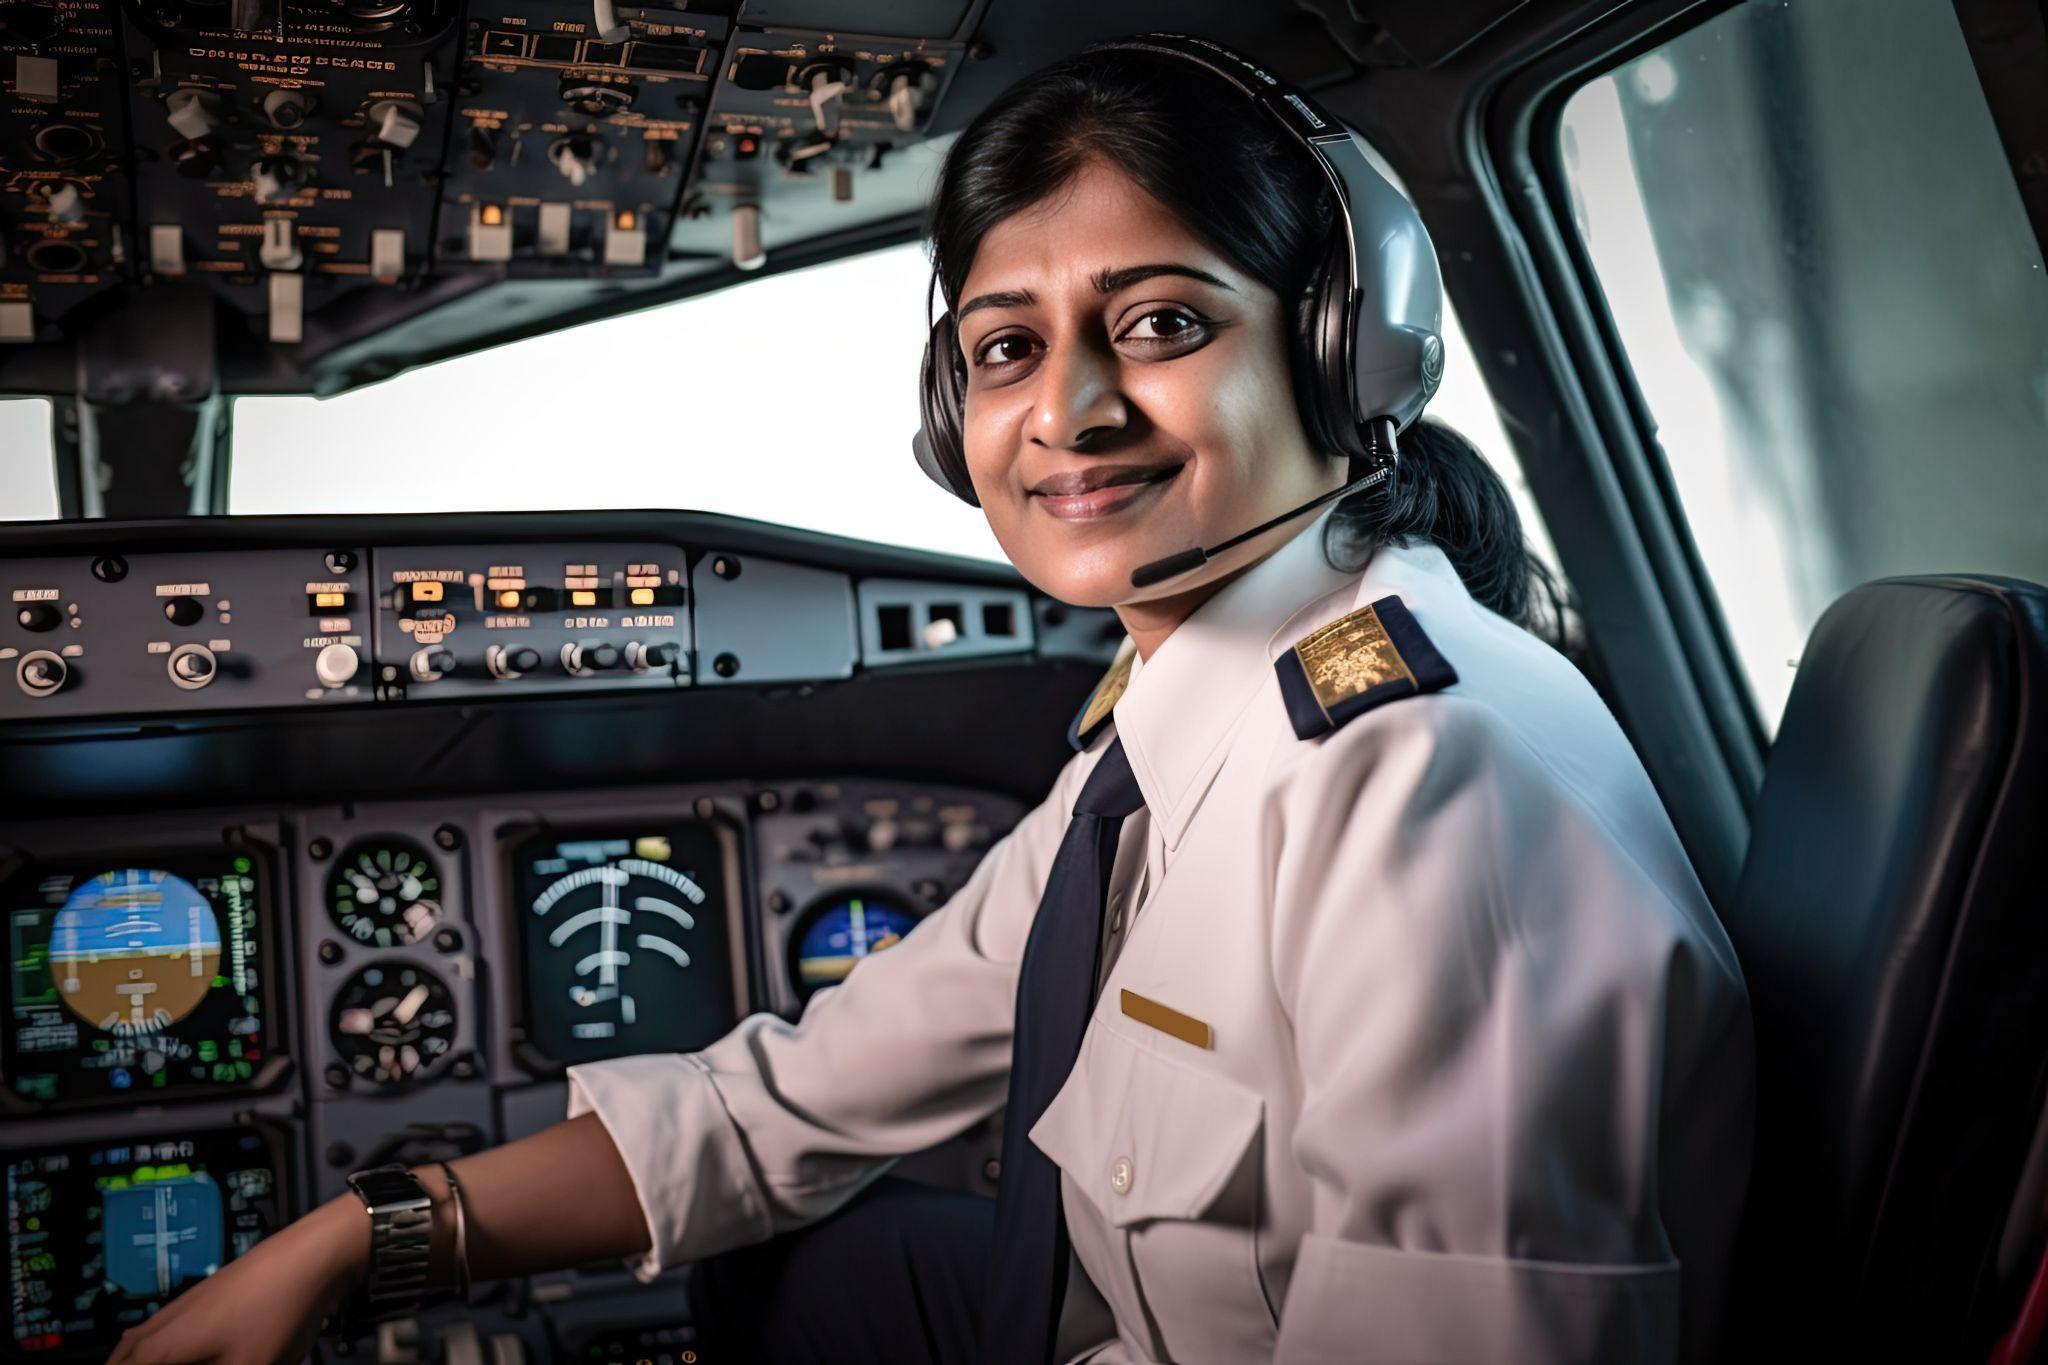 Female pilot smiling in cockpit of aircraft.